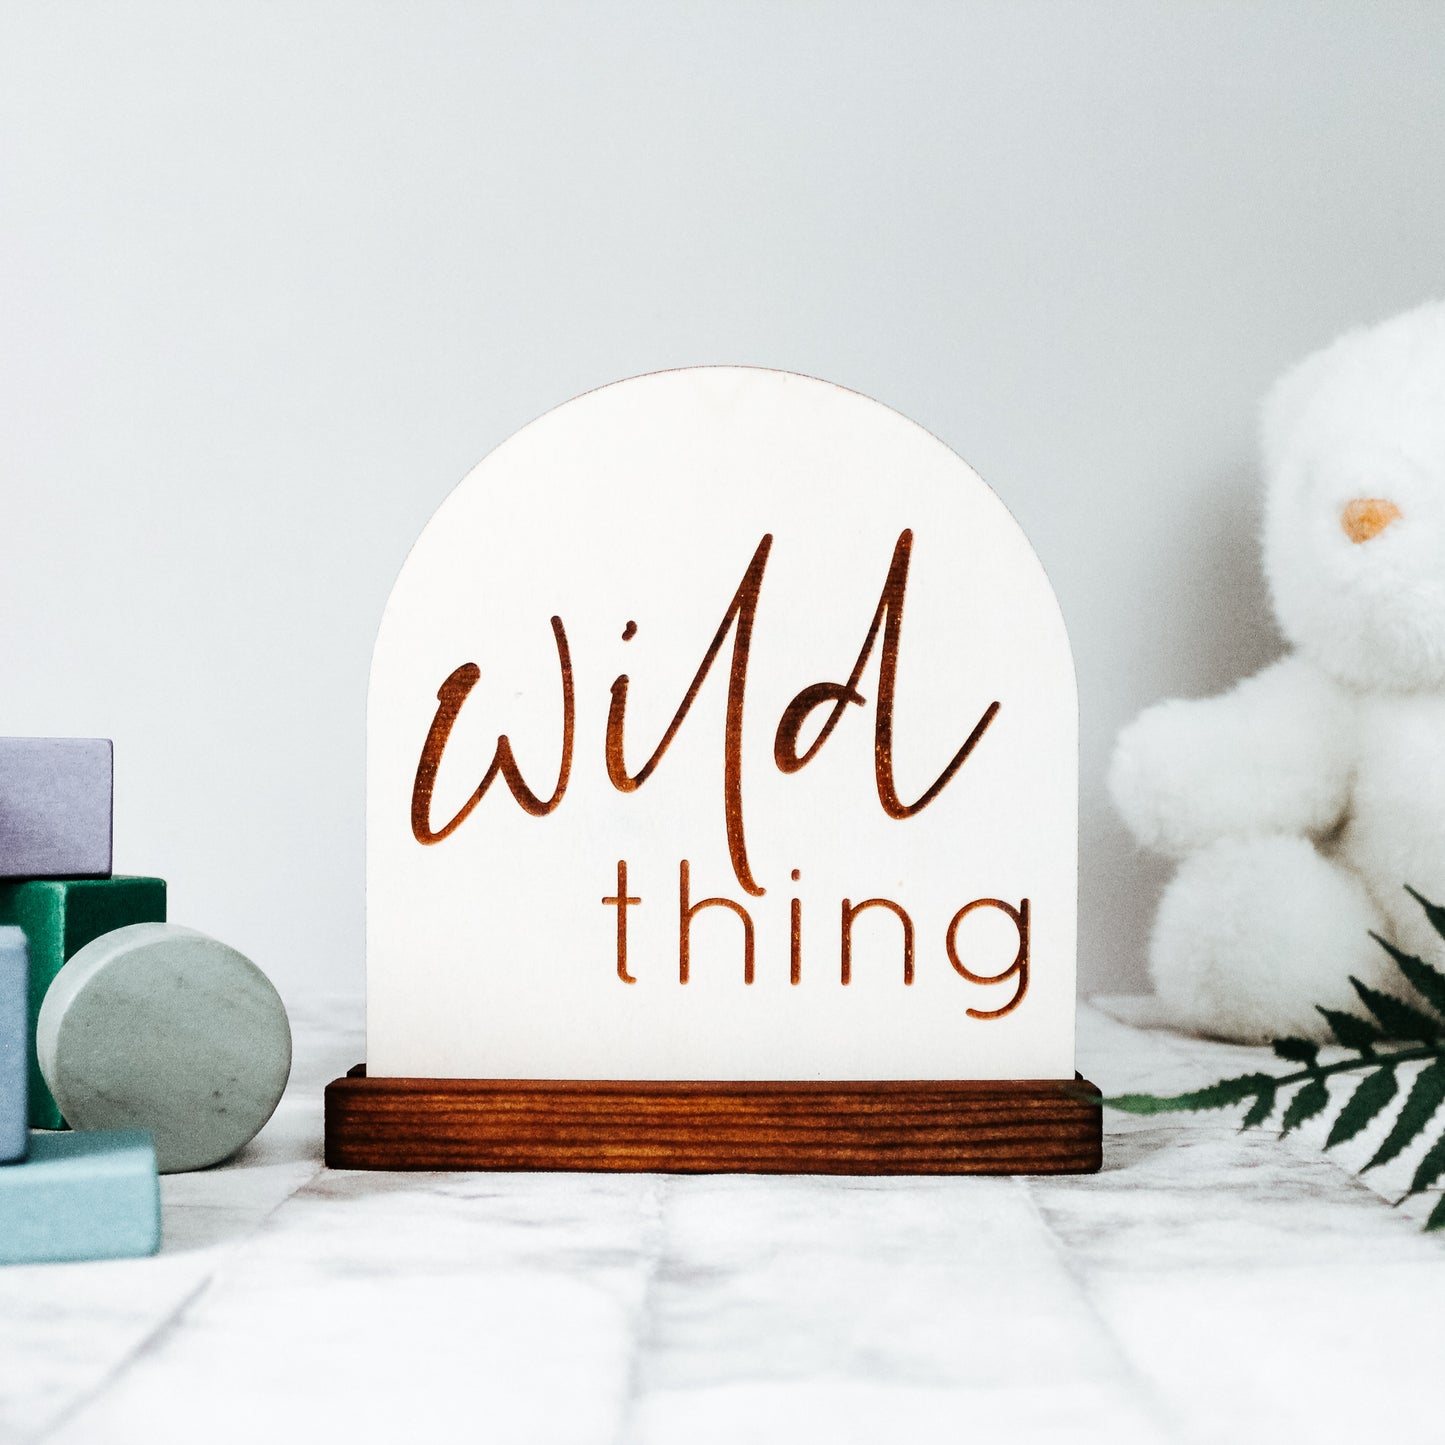 wild thing wooden engraved shelf sign for bookcase decor, playroom or nursery